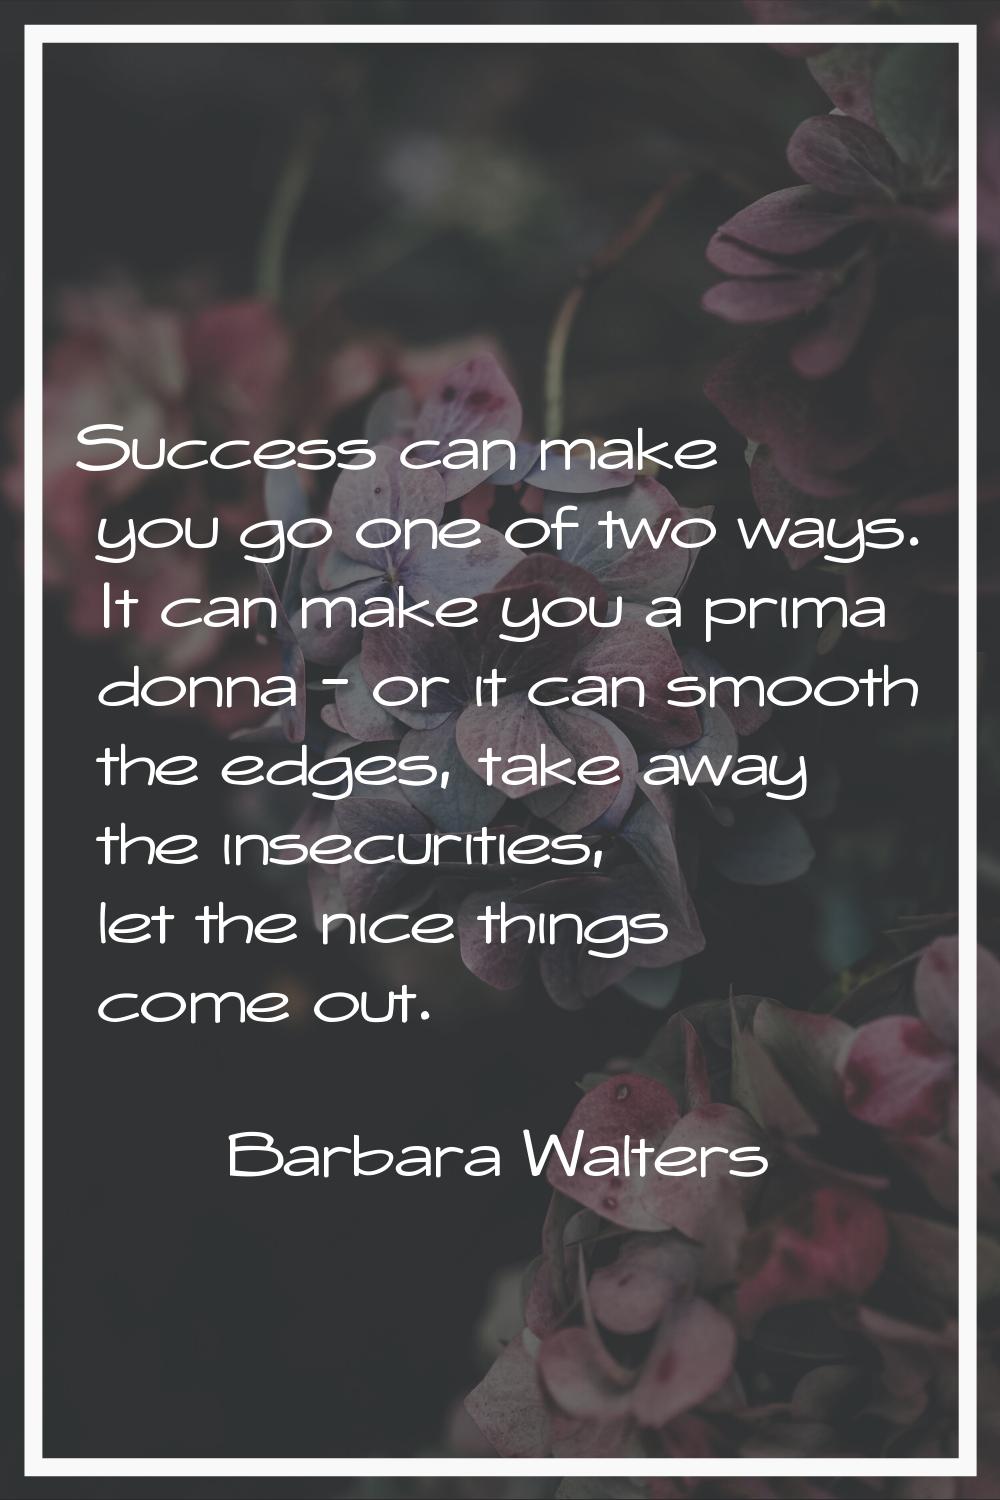 Success can make you go one of two ways. It can make you a prima donna - or it can smooth the edges